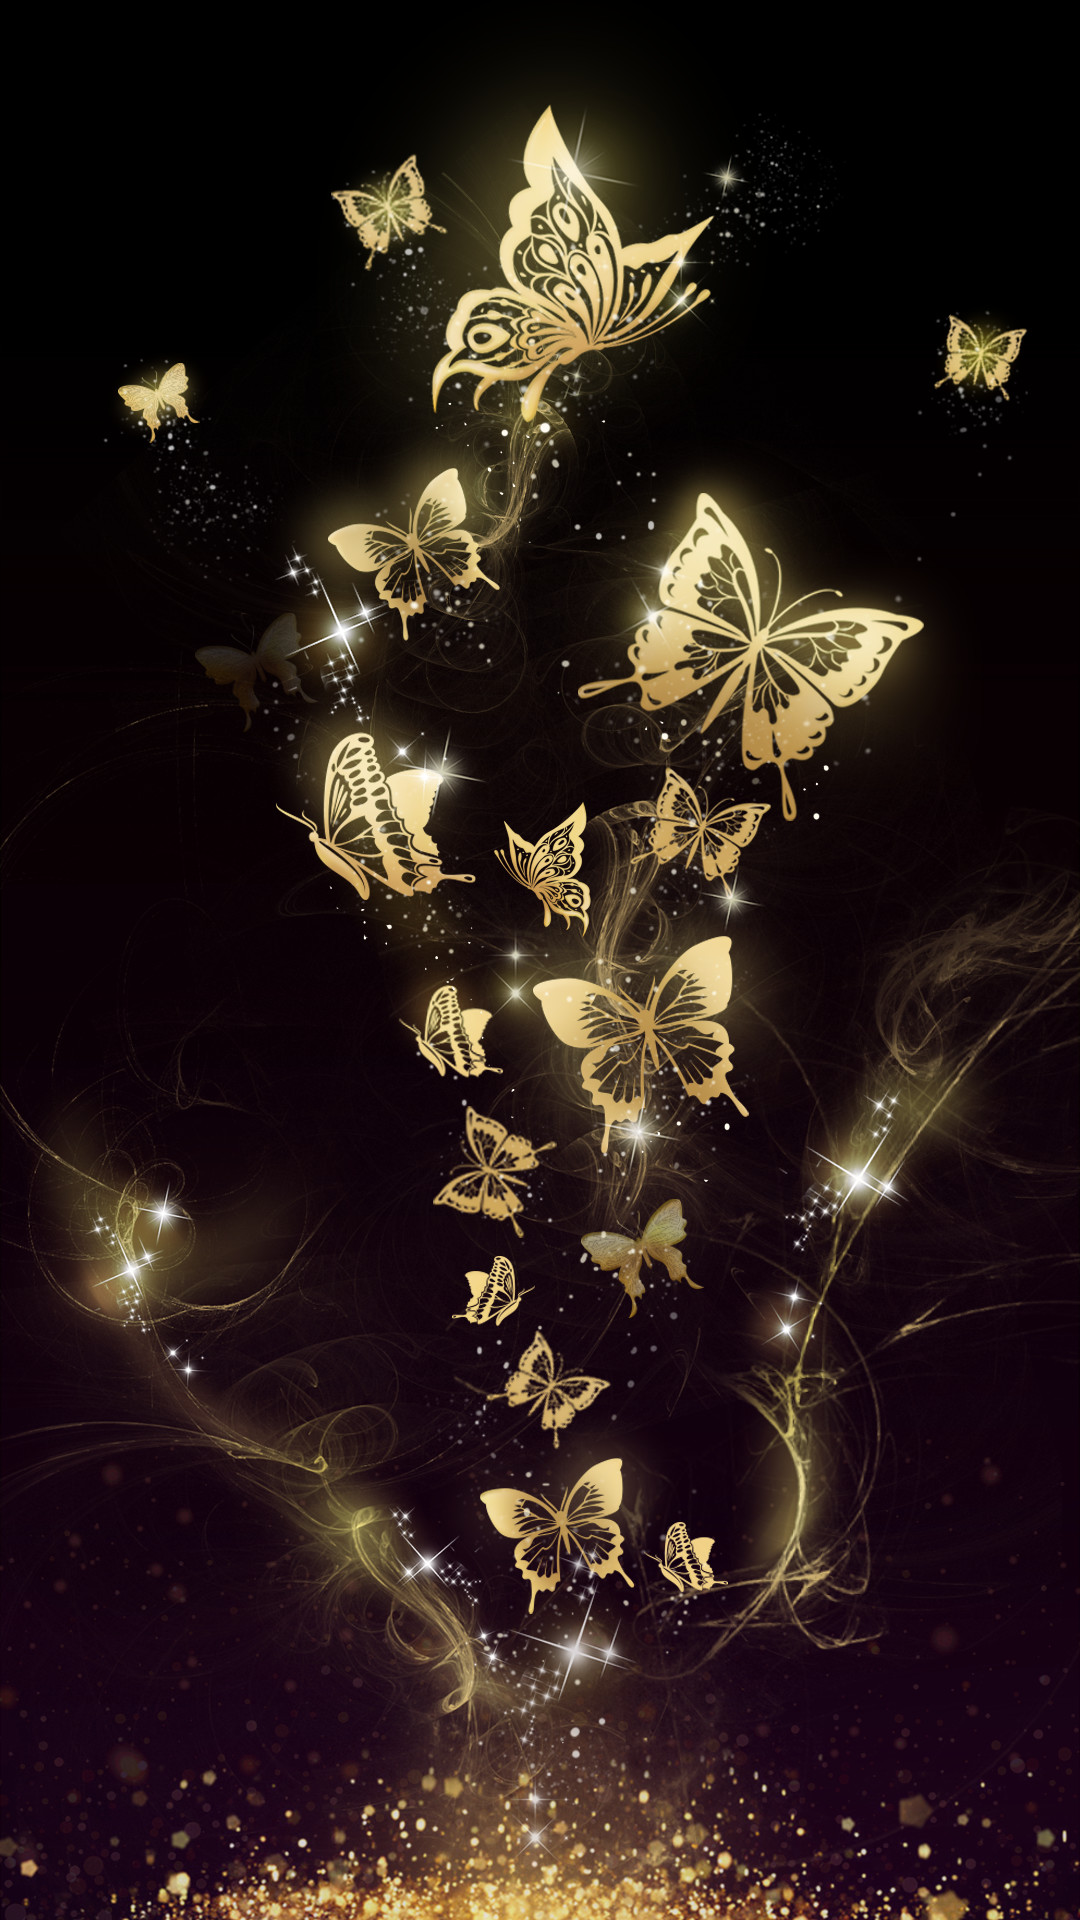 1080x1920 Beautiful golden butterfly live wallpaper! Android live wallpaper/background!  It is originally designed